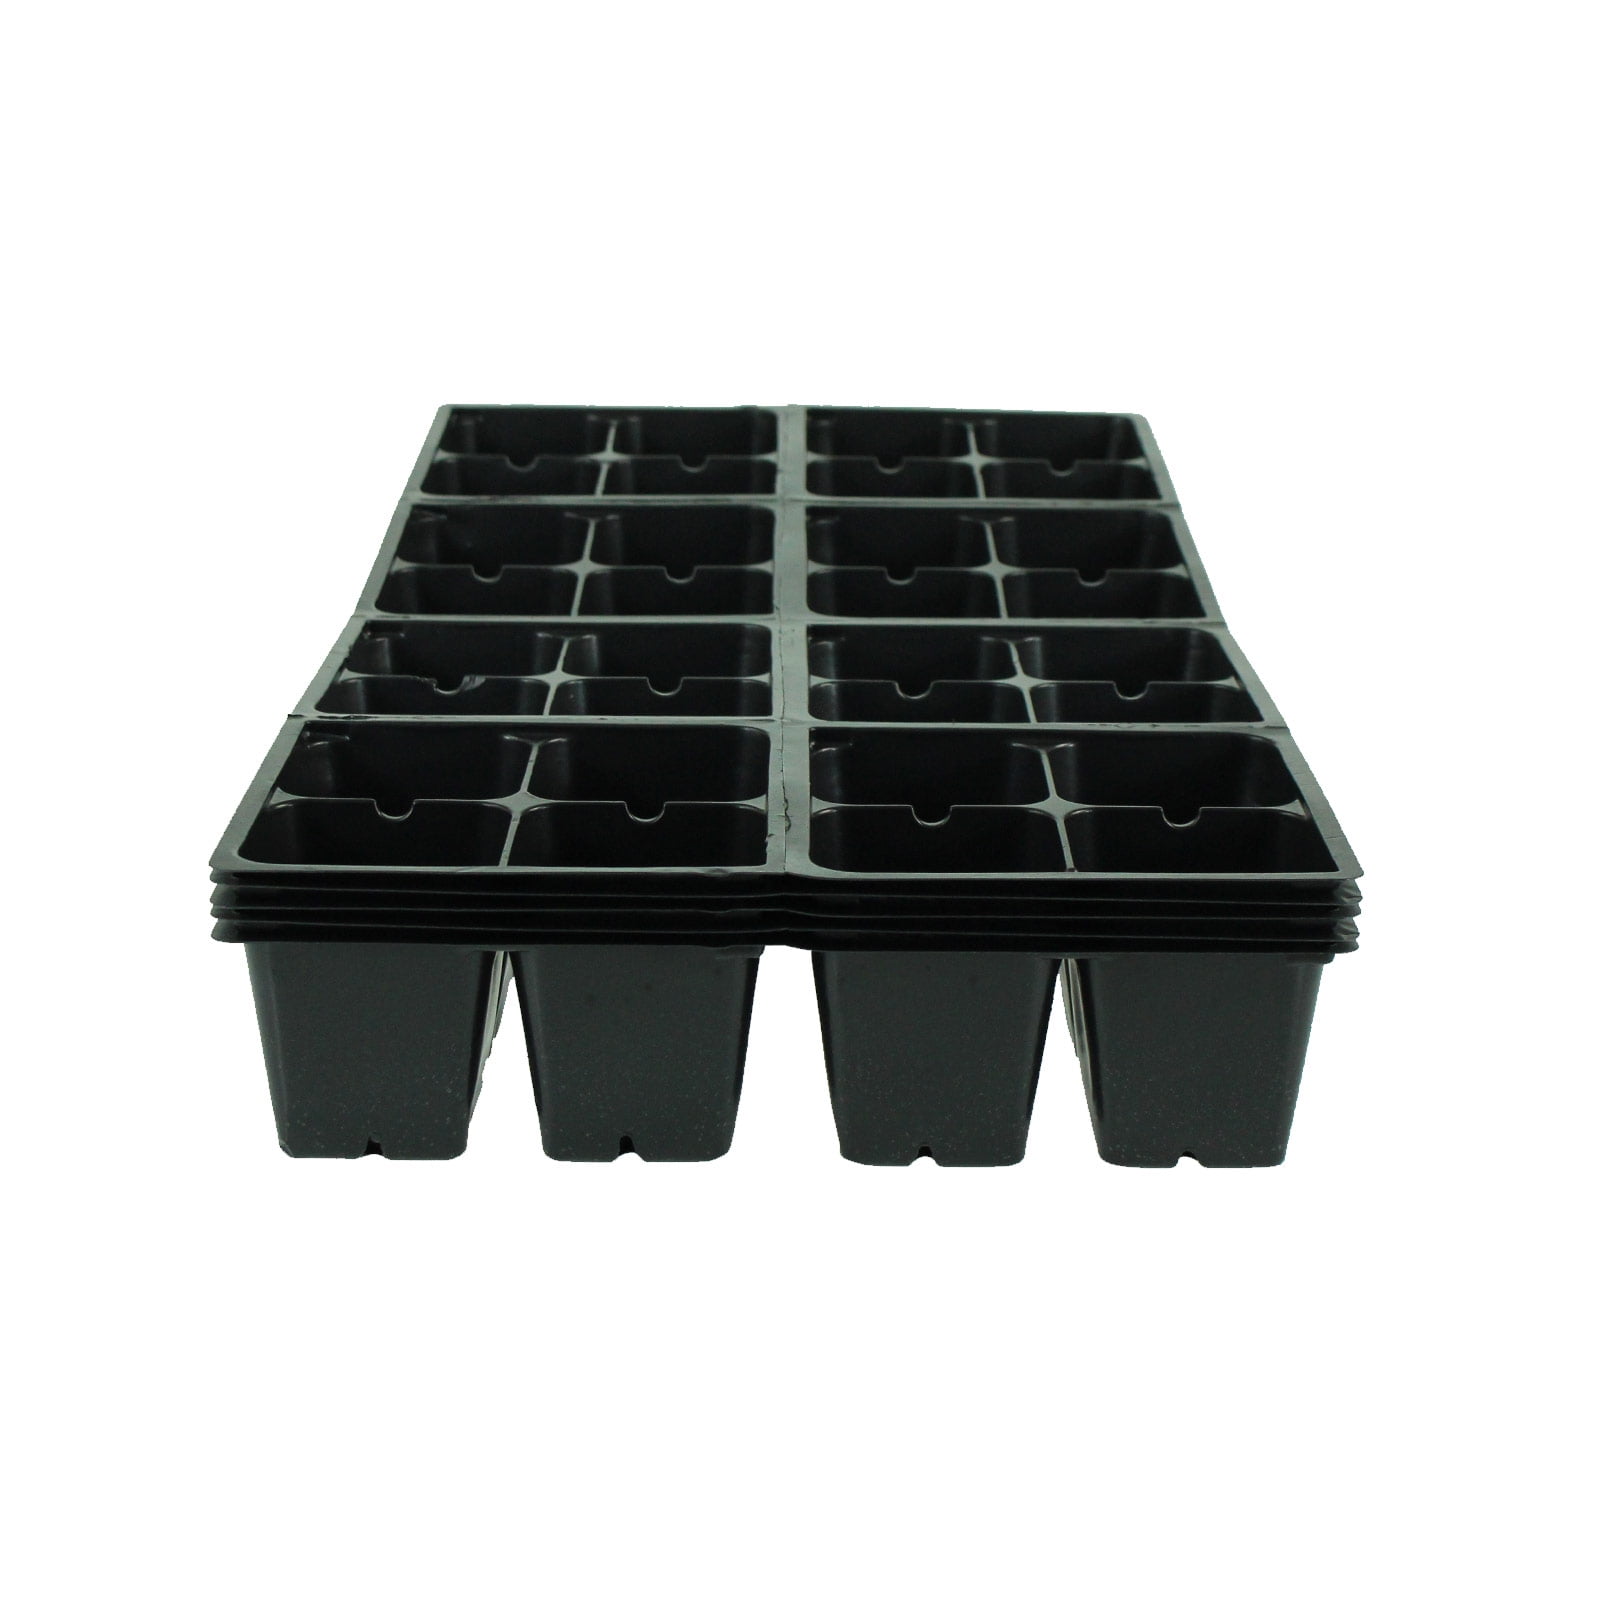 4Pcs 50-cell Seedling Starter Tray Seed Planting Insert Plug Tray Plant Growing 